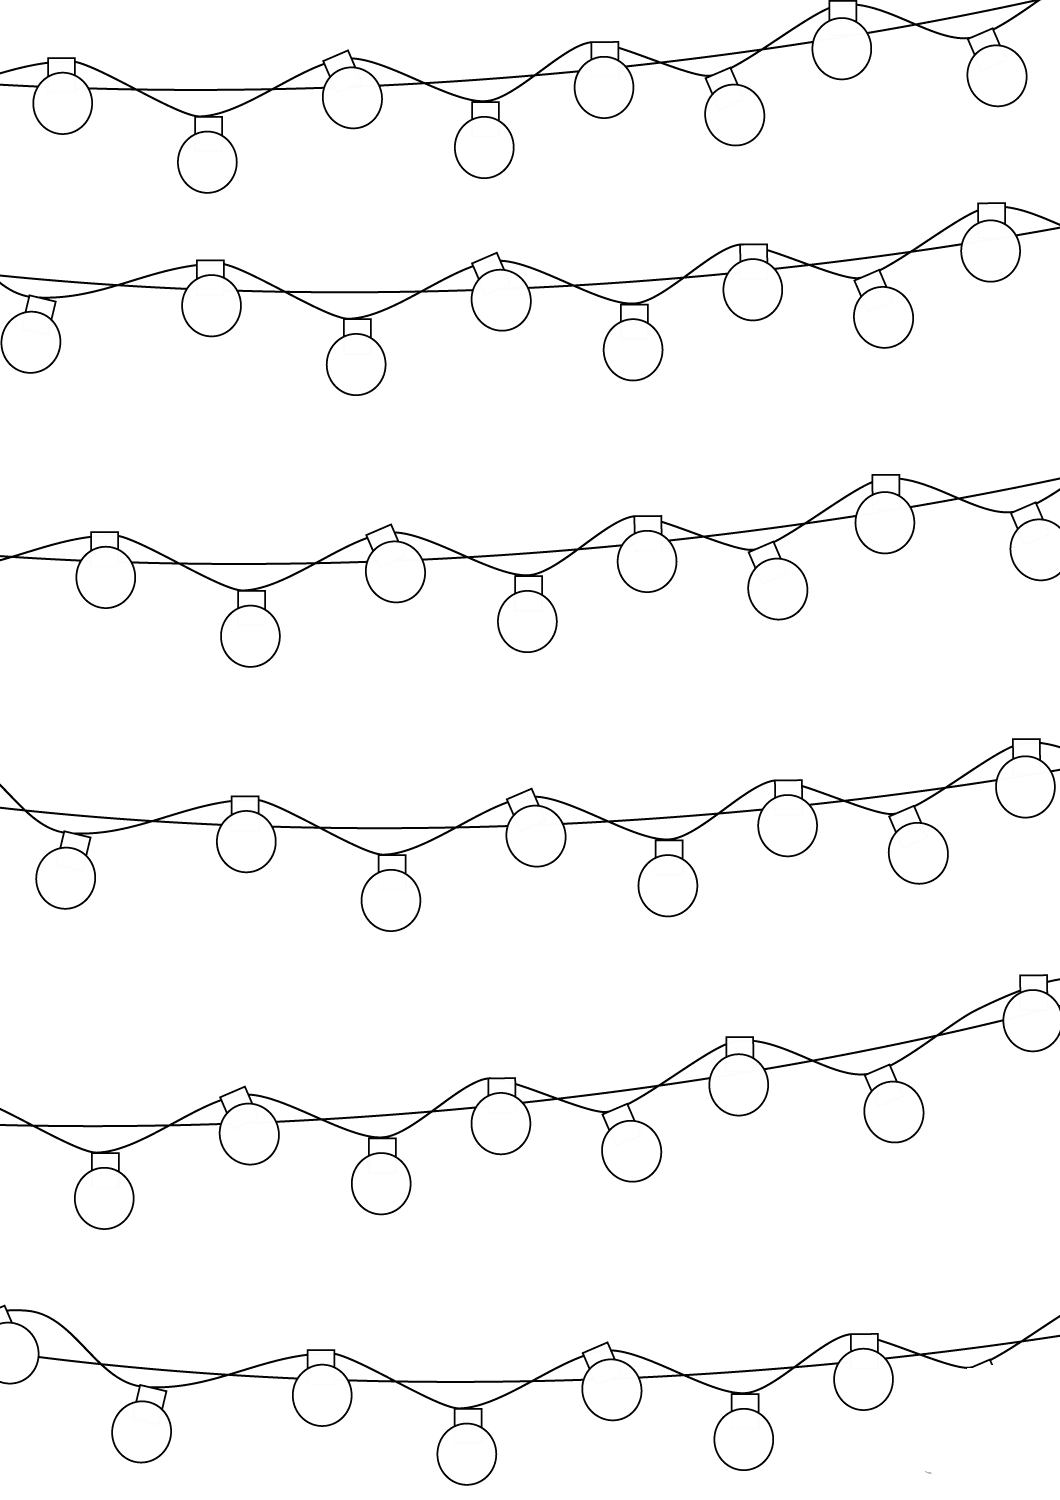 Garland coloring pages to download and print for free